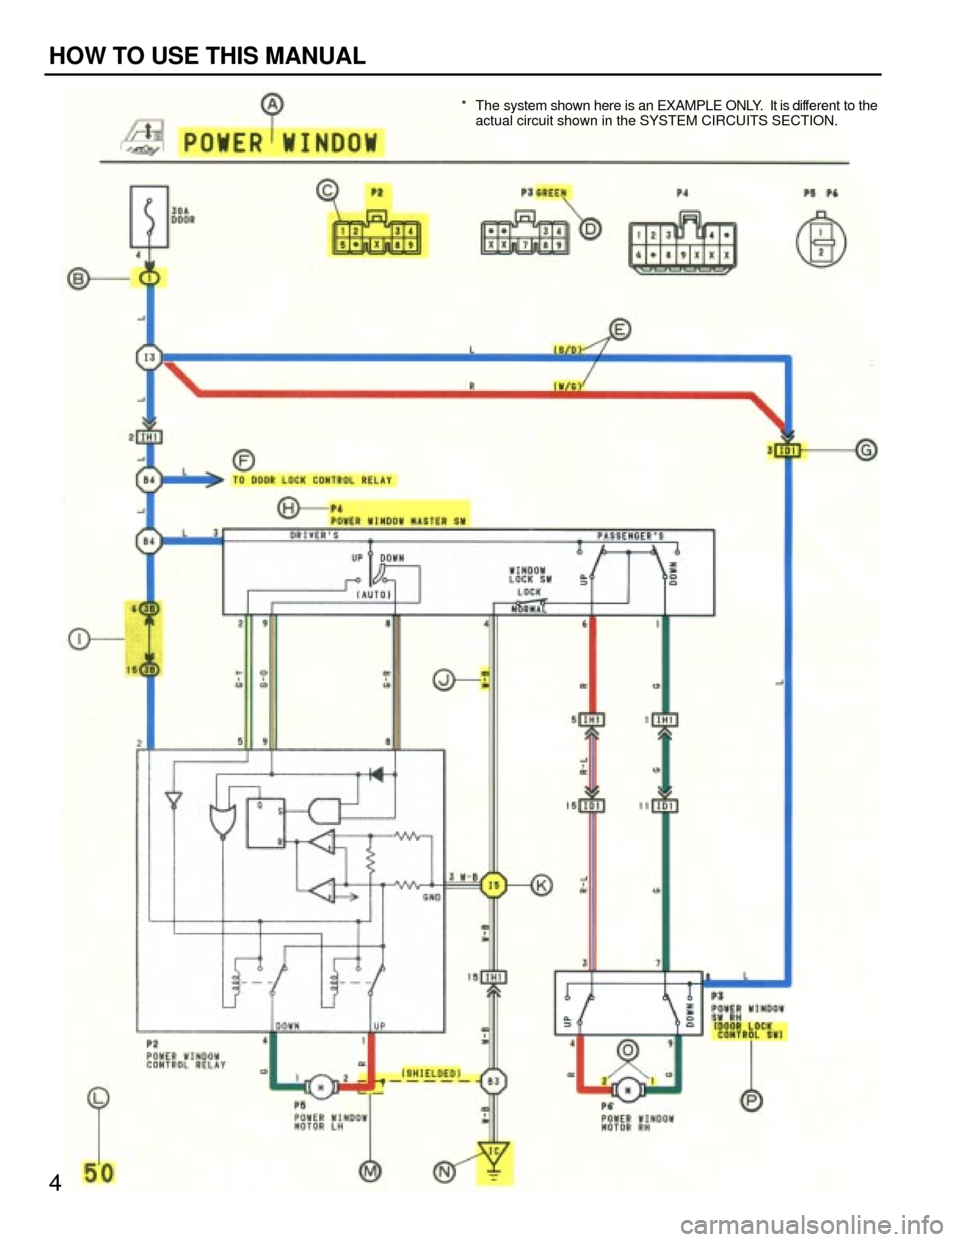 TOYOTA CAMRY 1994 XV10 / 4.G Wiring Diagrams Workshop Manual * The system shown here is an EXAMPLE ONLY.  It is different to the
actual circuit shown in the SYSTEM CIRCUITS SECTION.
4
HOW TO USE THIS MANUAL 